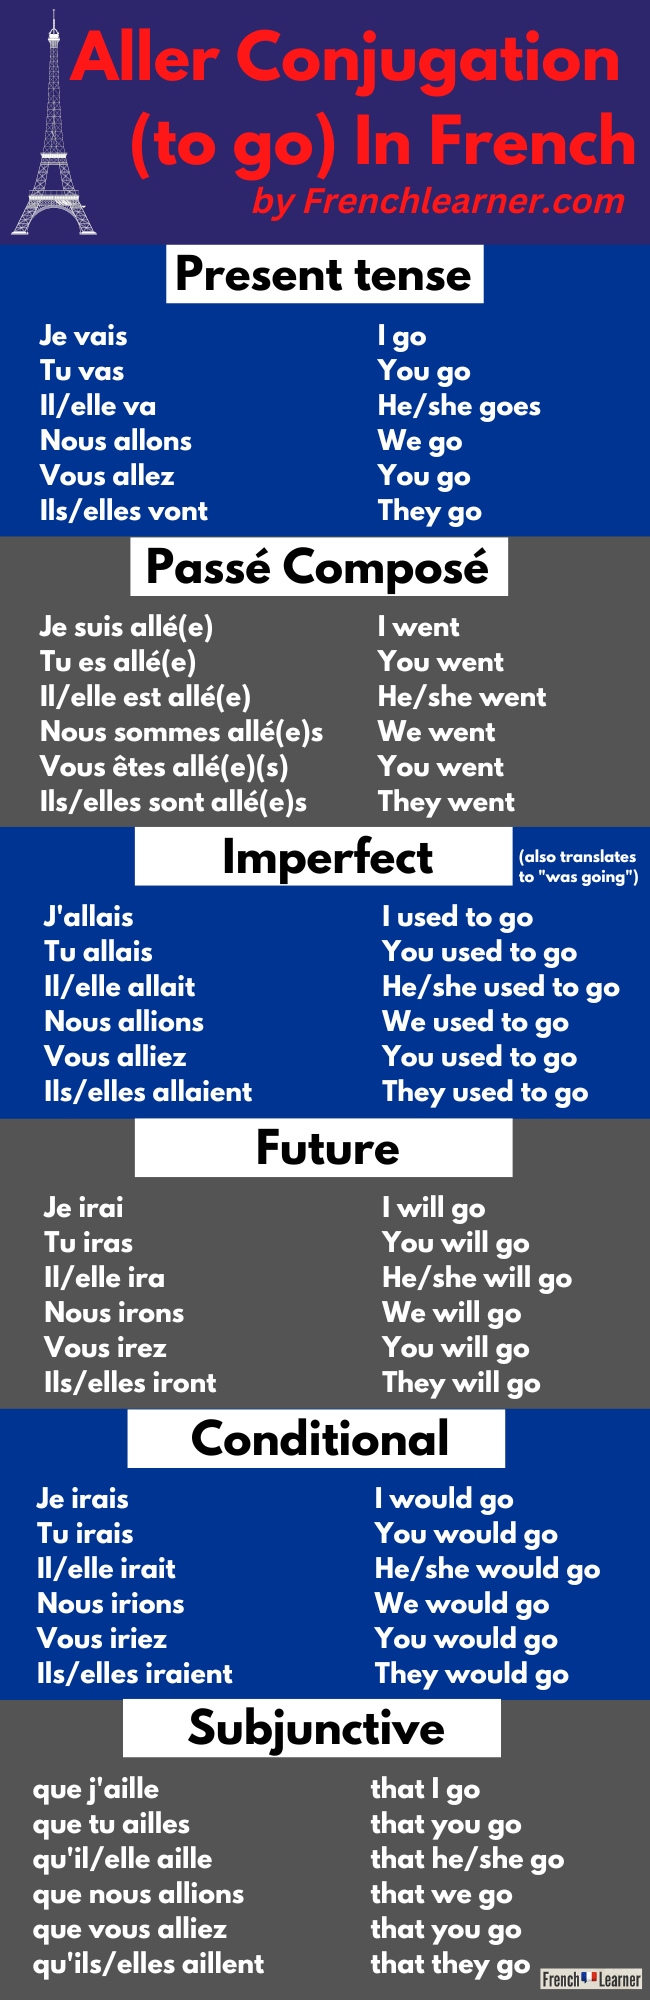 Aller Au Conditionnel Present Aller Conjugation: How To Conjugate The Verb To Go In French